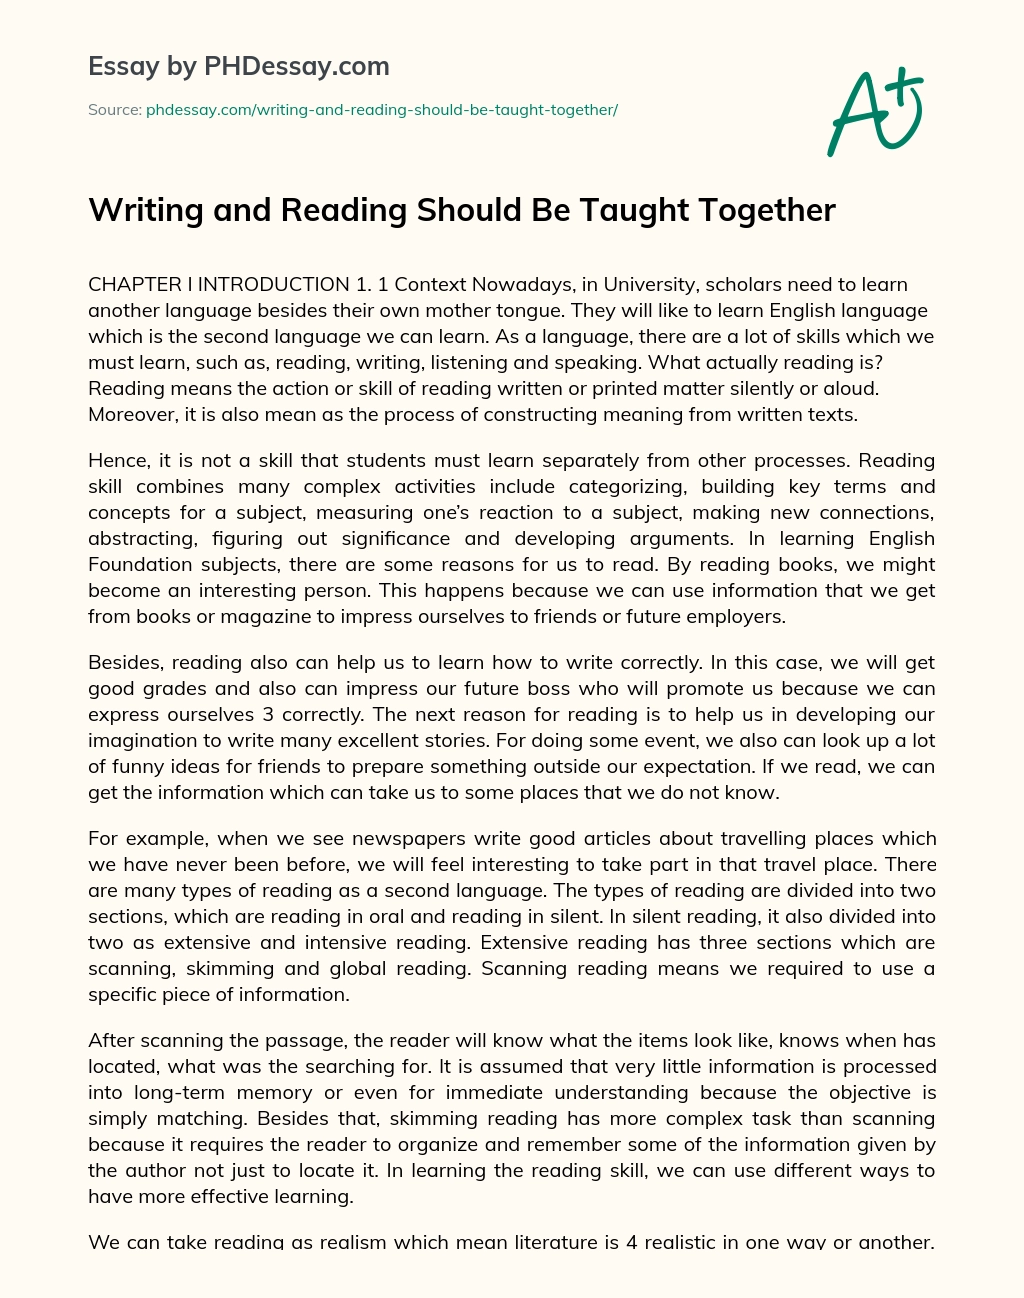 Writing and Reading Should Be Taught Together essay